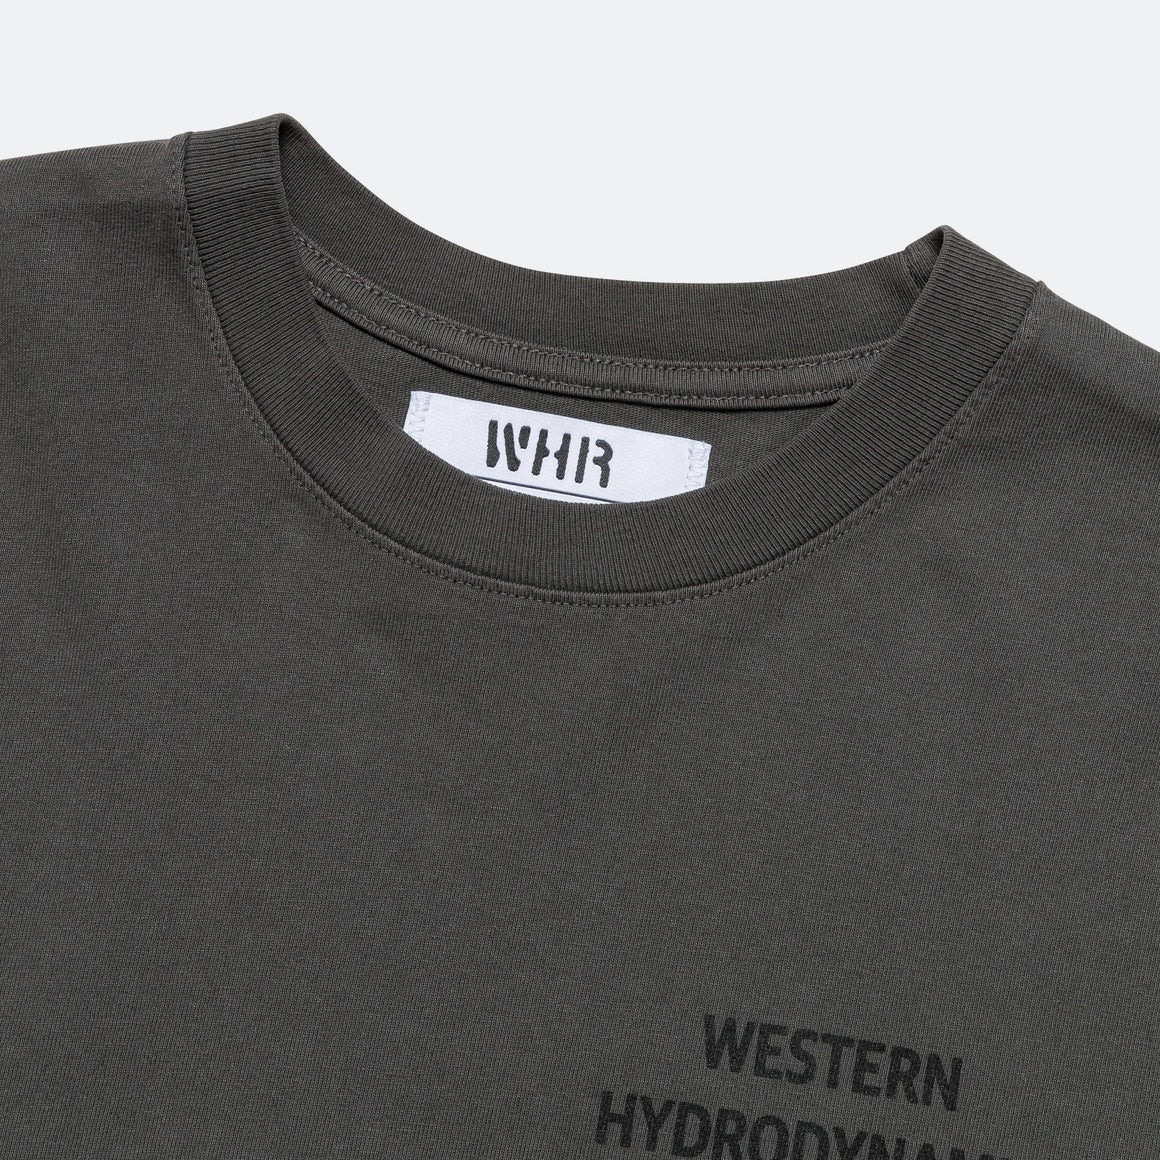 Western Hydrodynamic Research - Worker S/S Tee - Black - UP THERE